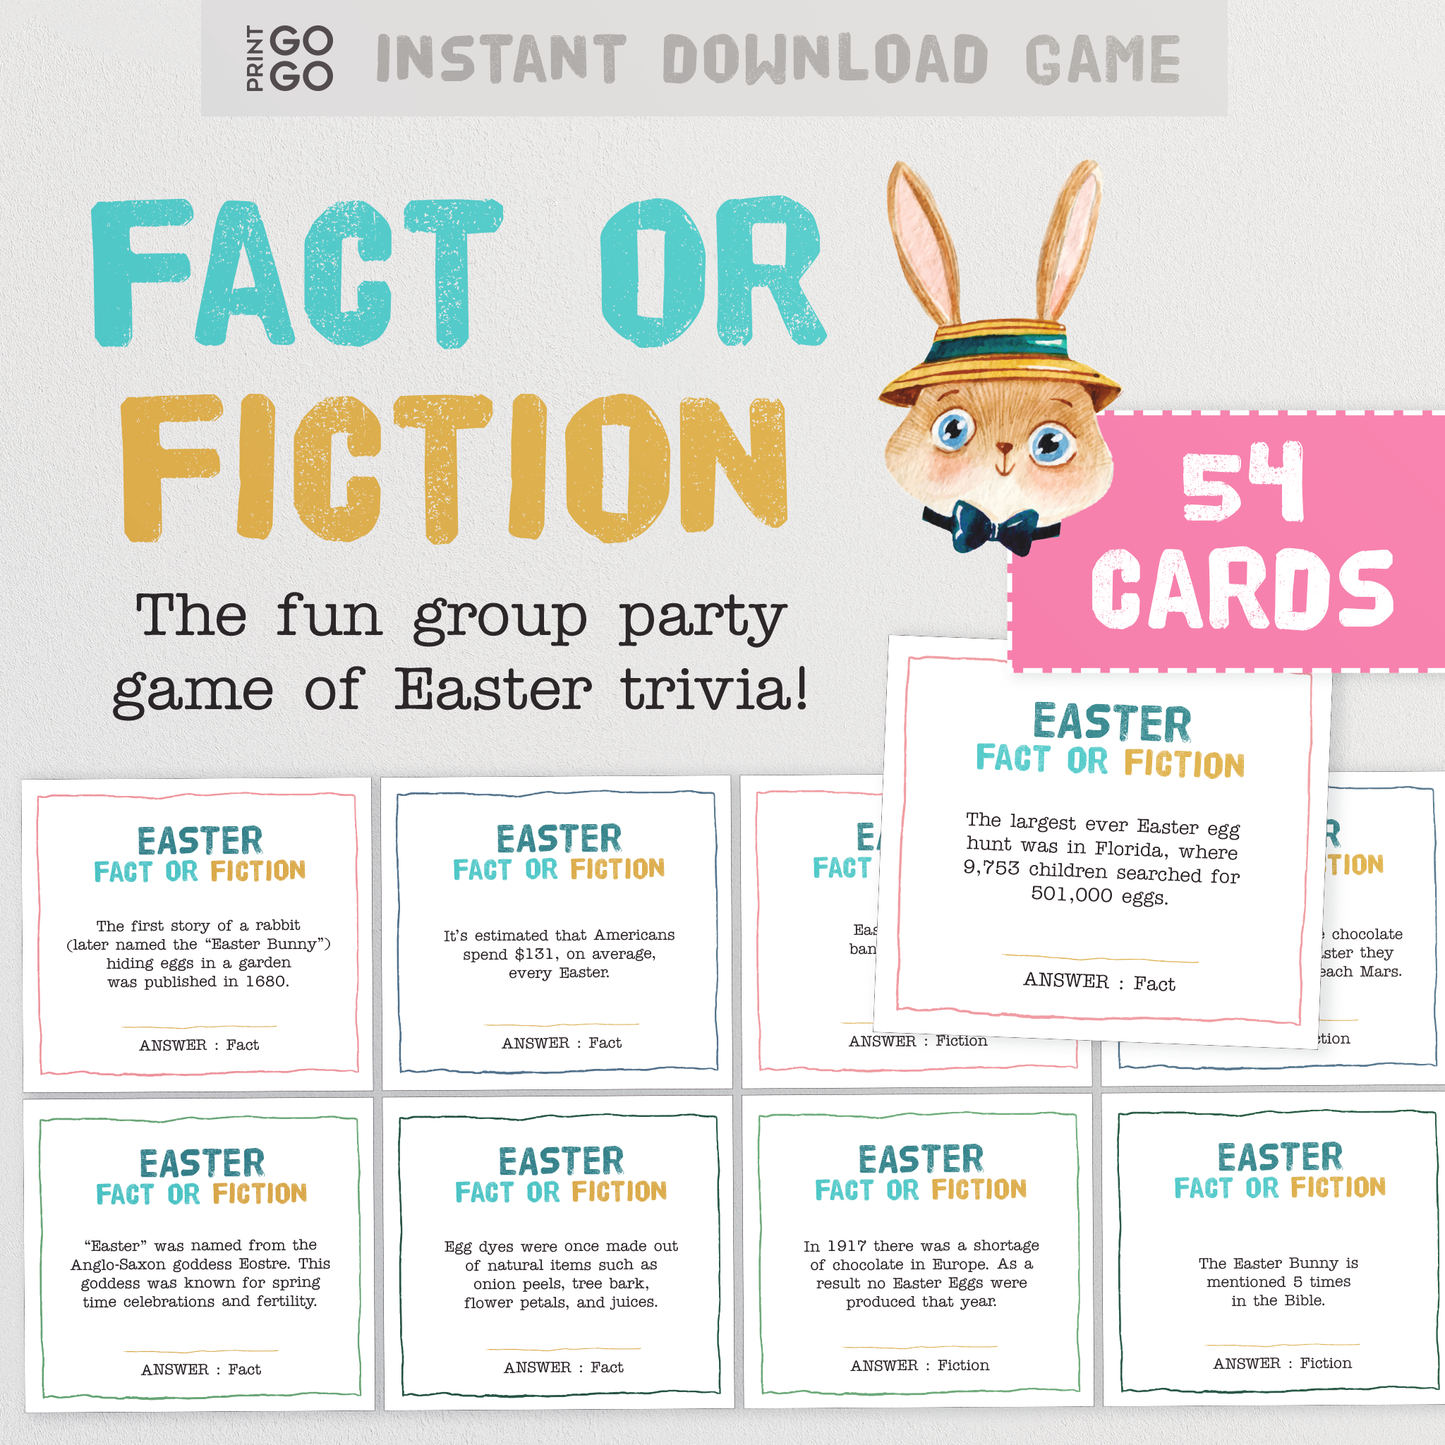 Easter Fact or Fiction - The Fun Group Party Game of Easter Trivia